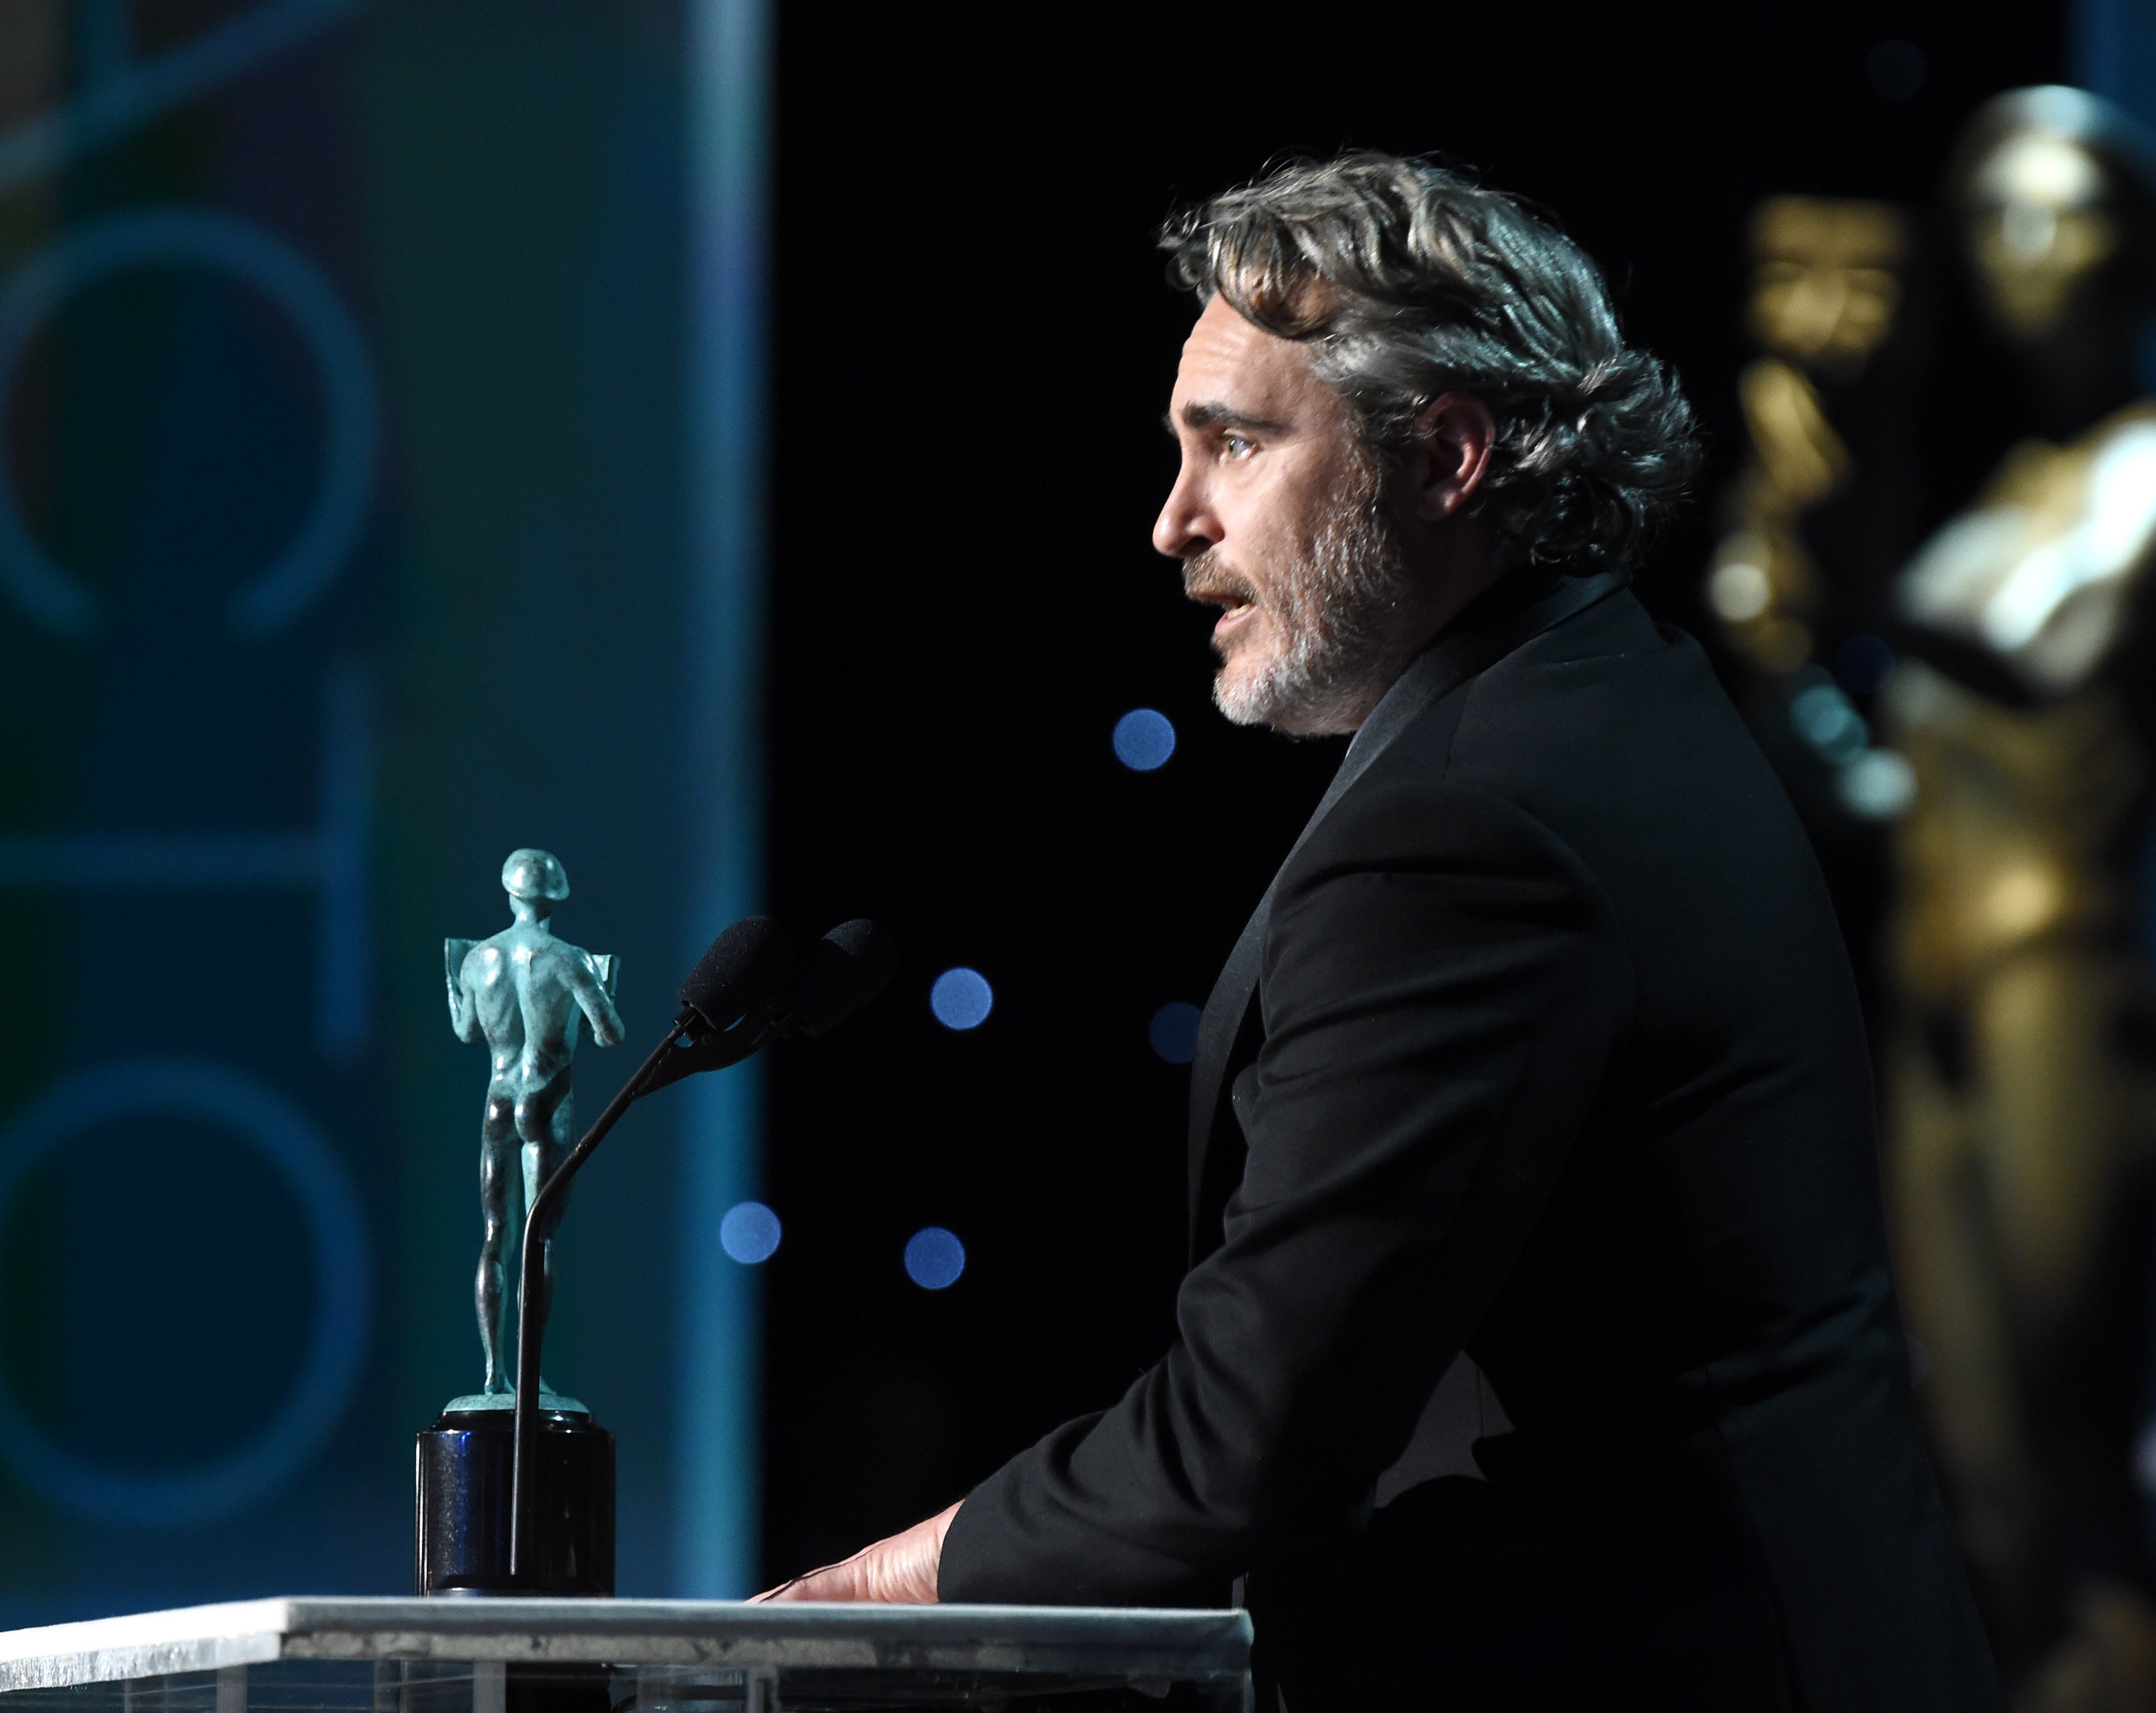 Joaquin Phoenix accepting an award for 'Joker' at the Annual Screen Actors Guild Awards on January 19, 2020 in Los Angeles. | Source: Getty Images